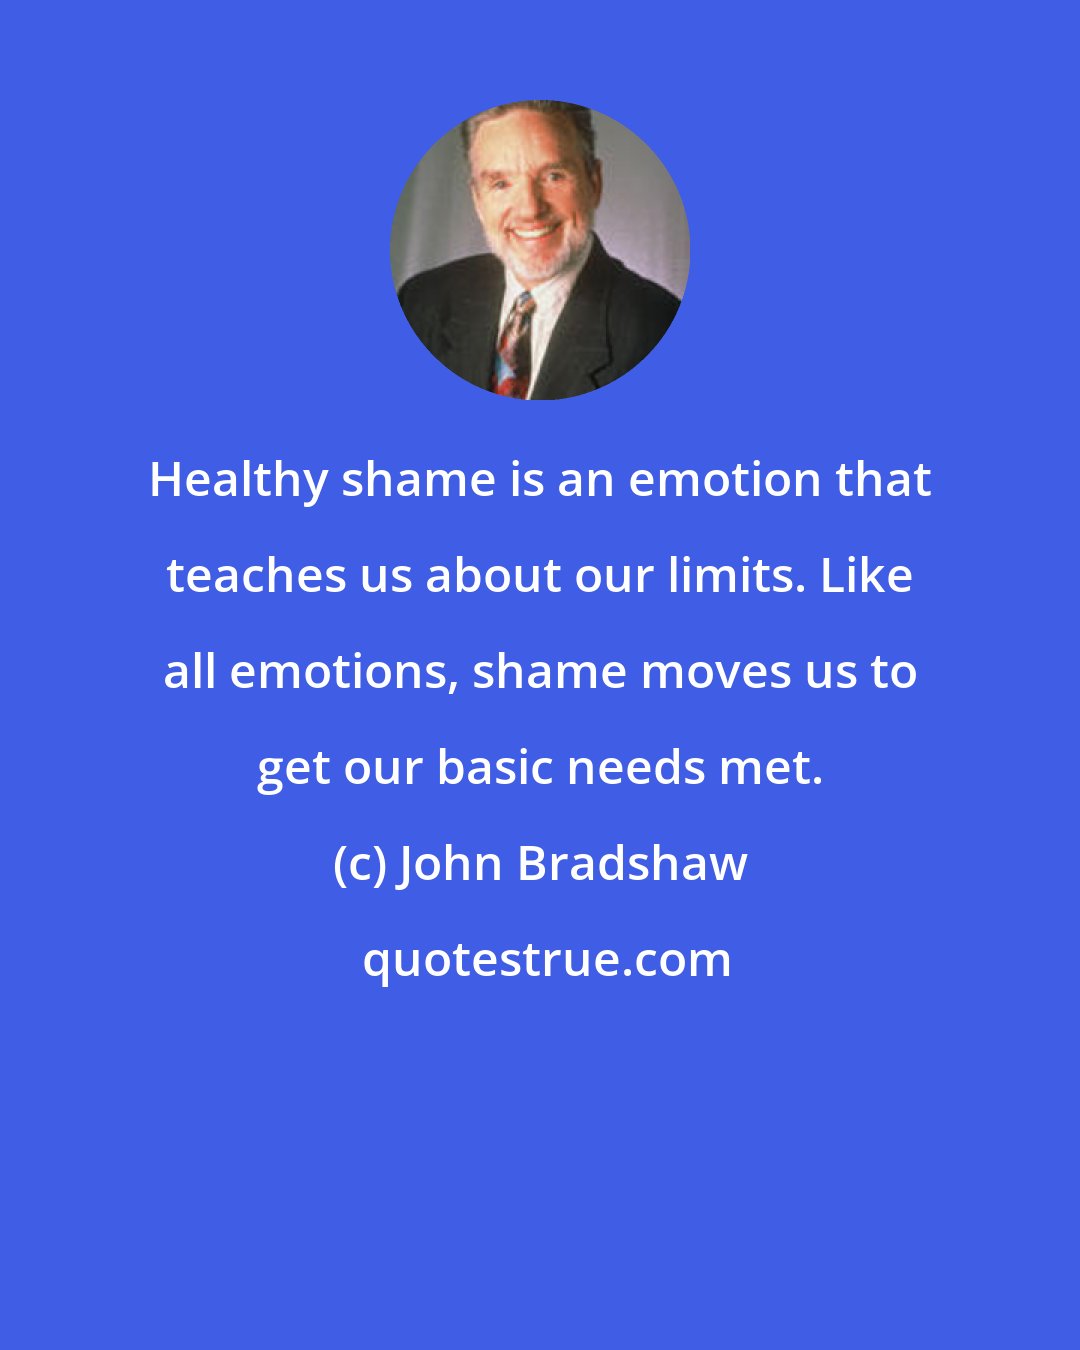 John Bradshaw: Healthy shame is an emotion that teaches us about our limits. Like all emotions, shame moves us to get our basic needs met.